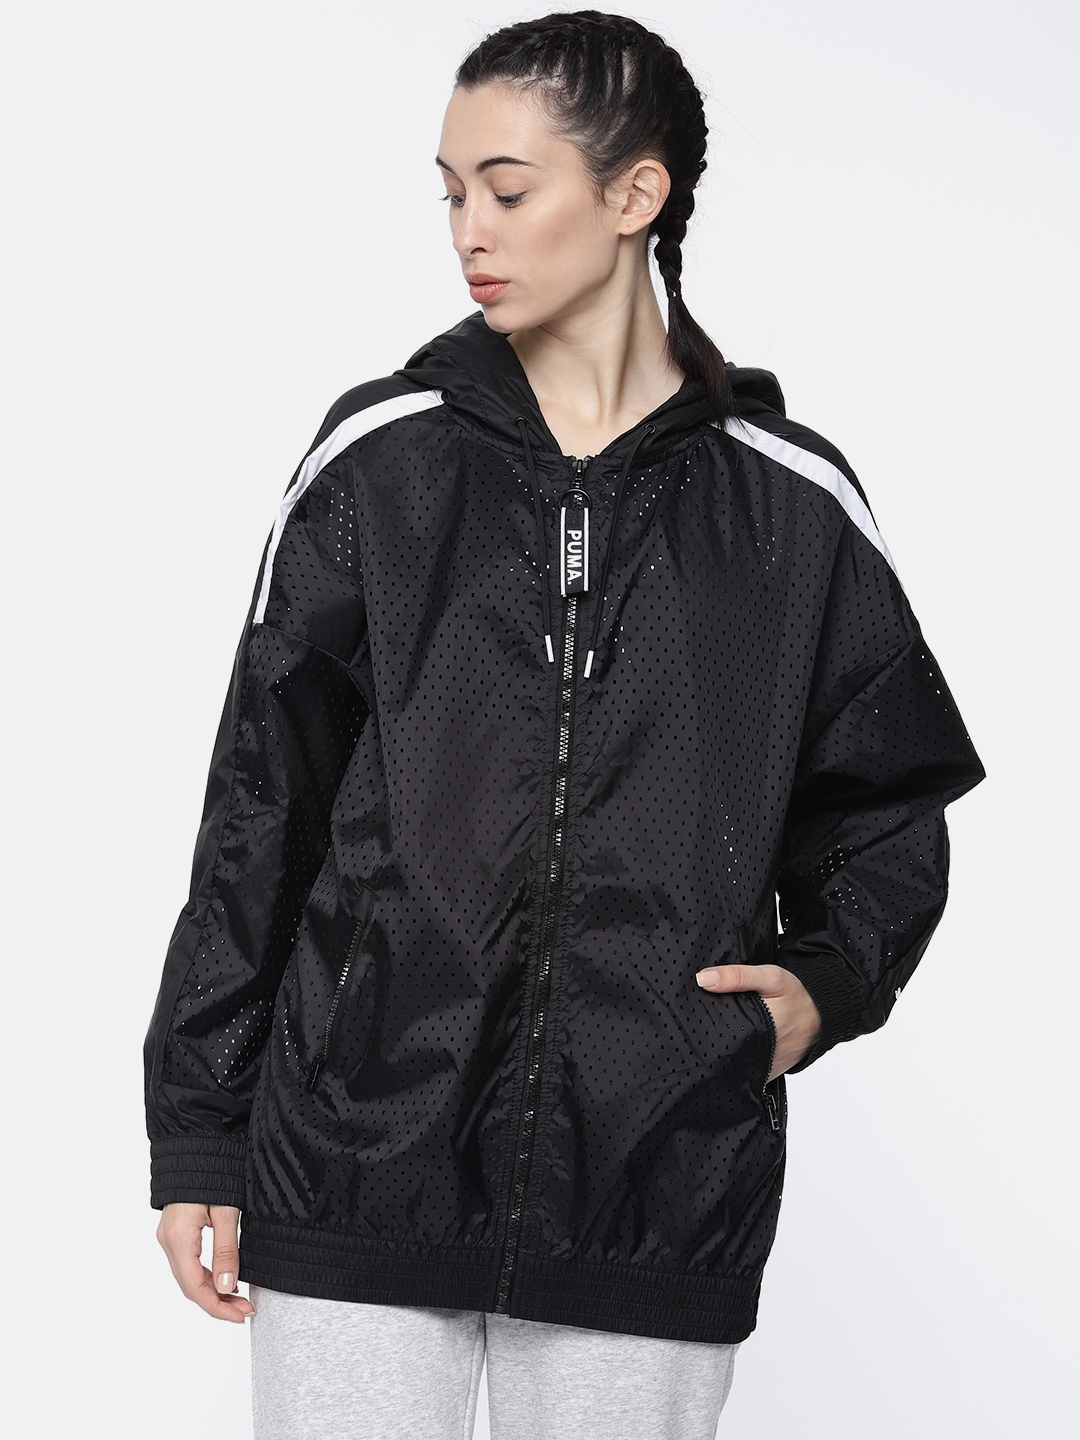 Puma Chase Woven Jacket | vlr.eng.br